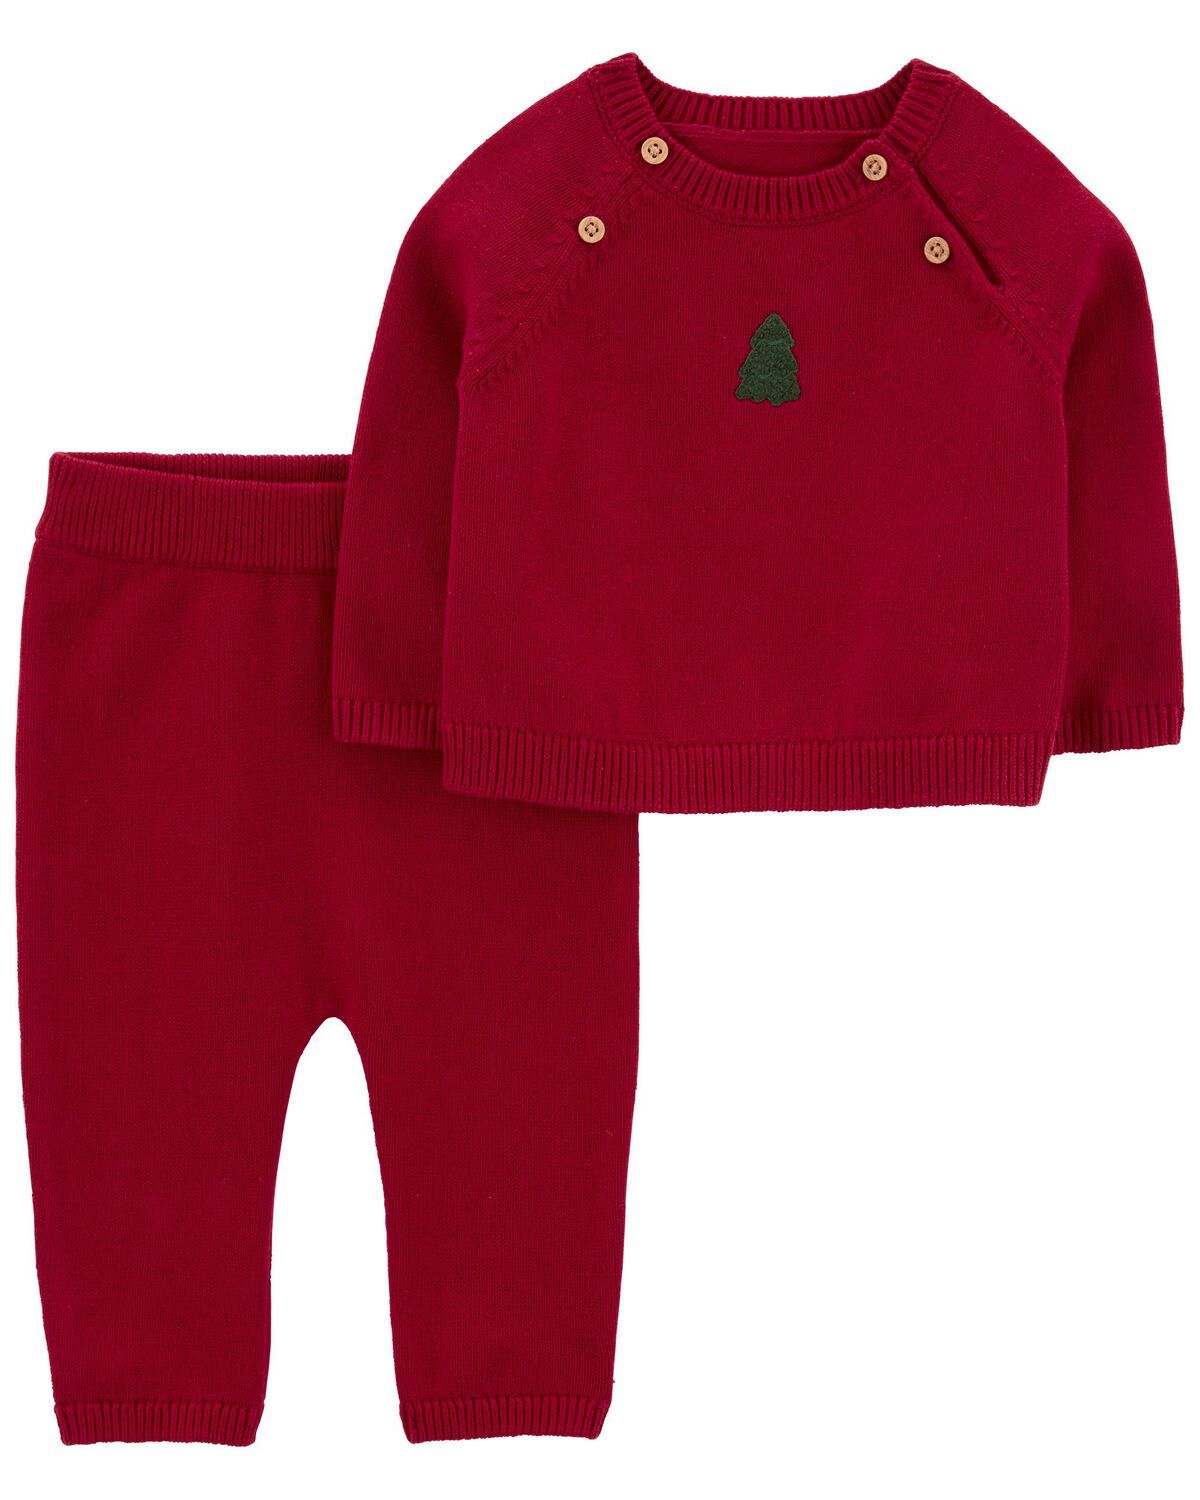 Red Baby 2-Piece Christmas Tree Outfit Set | carters.com | Carter's